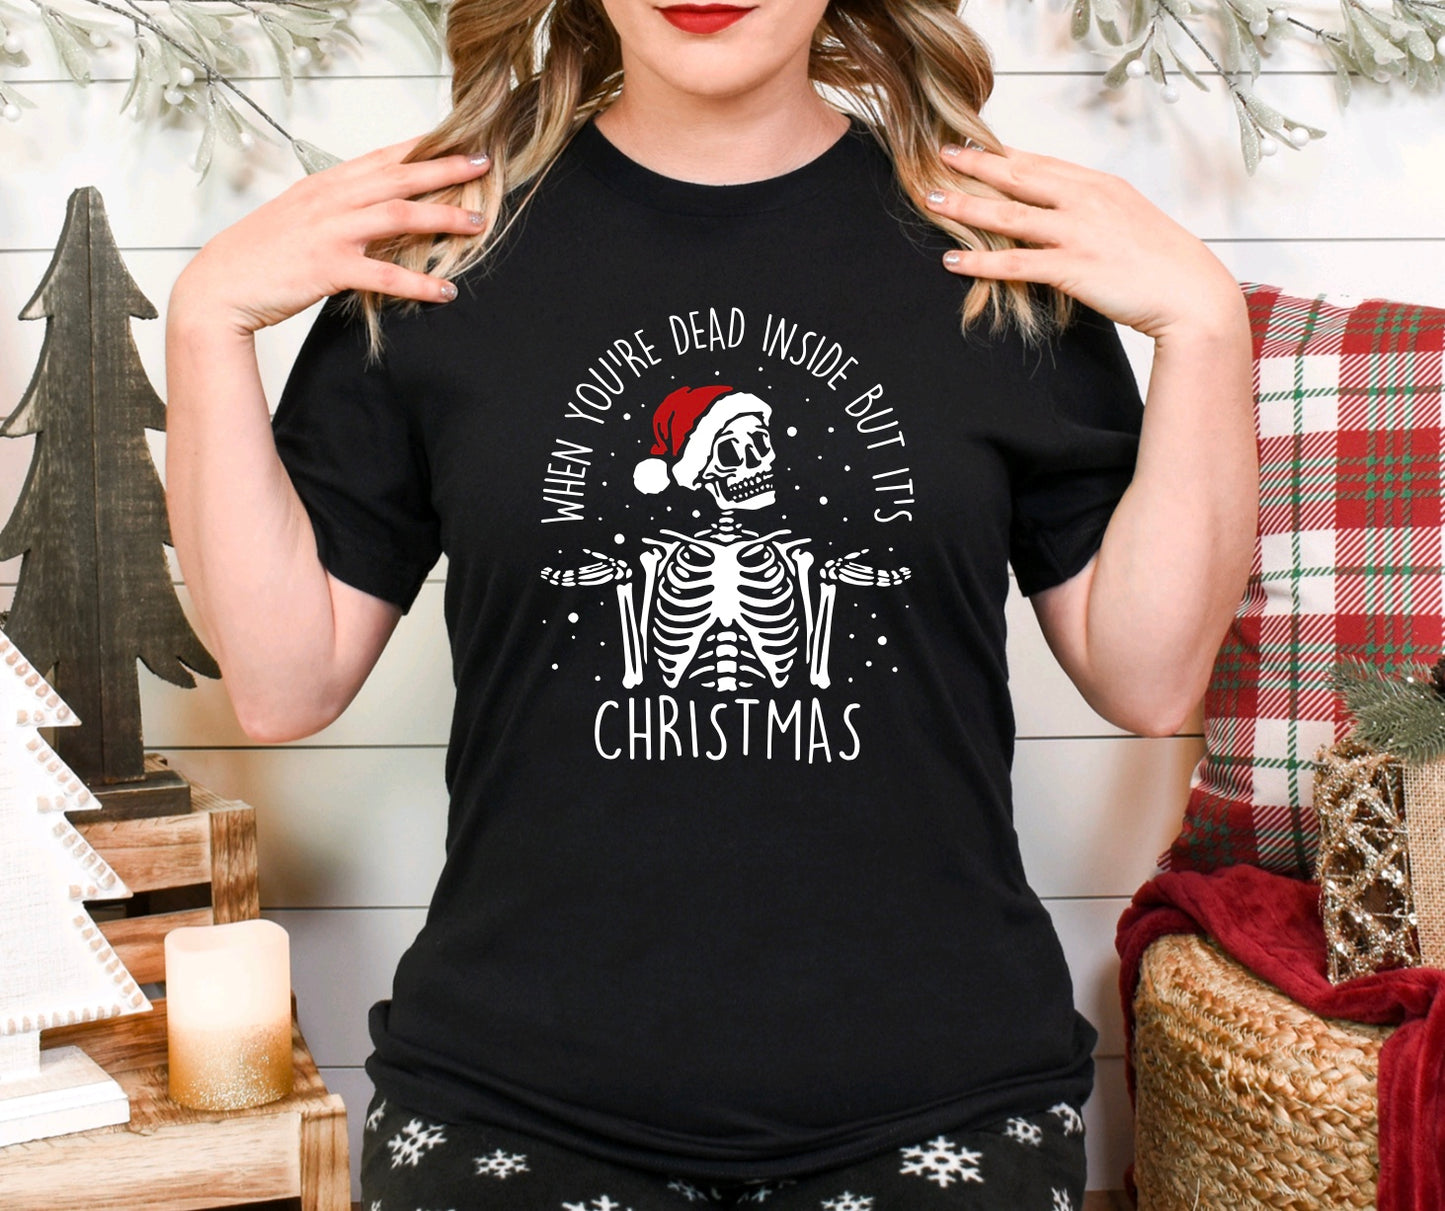 When you’re dead inside but it’s Christmas skeleton Christmas t-shirt in black